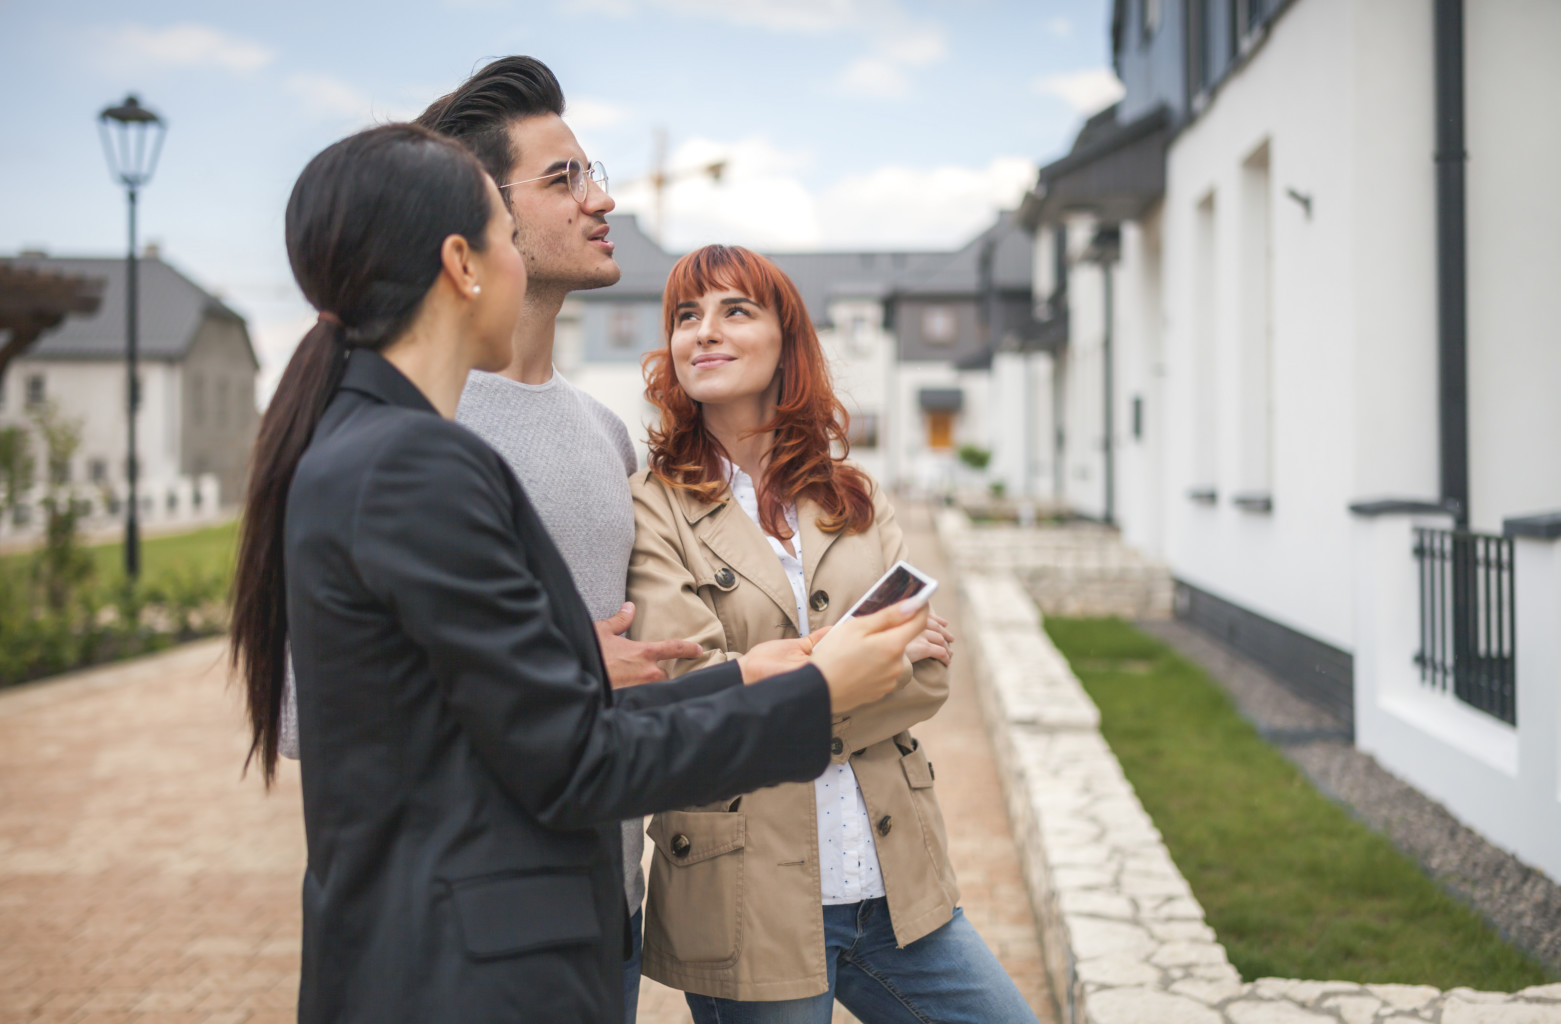 How To Go About Buying A House To Rent Out